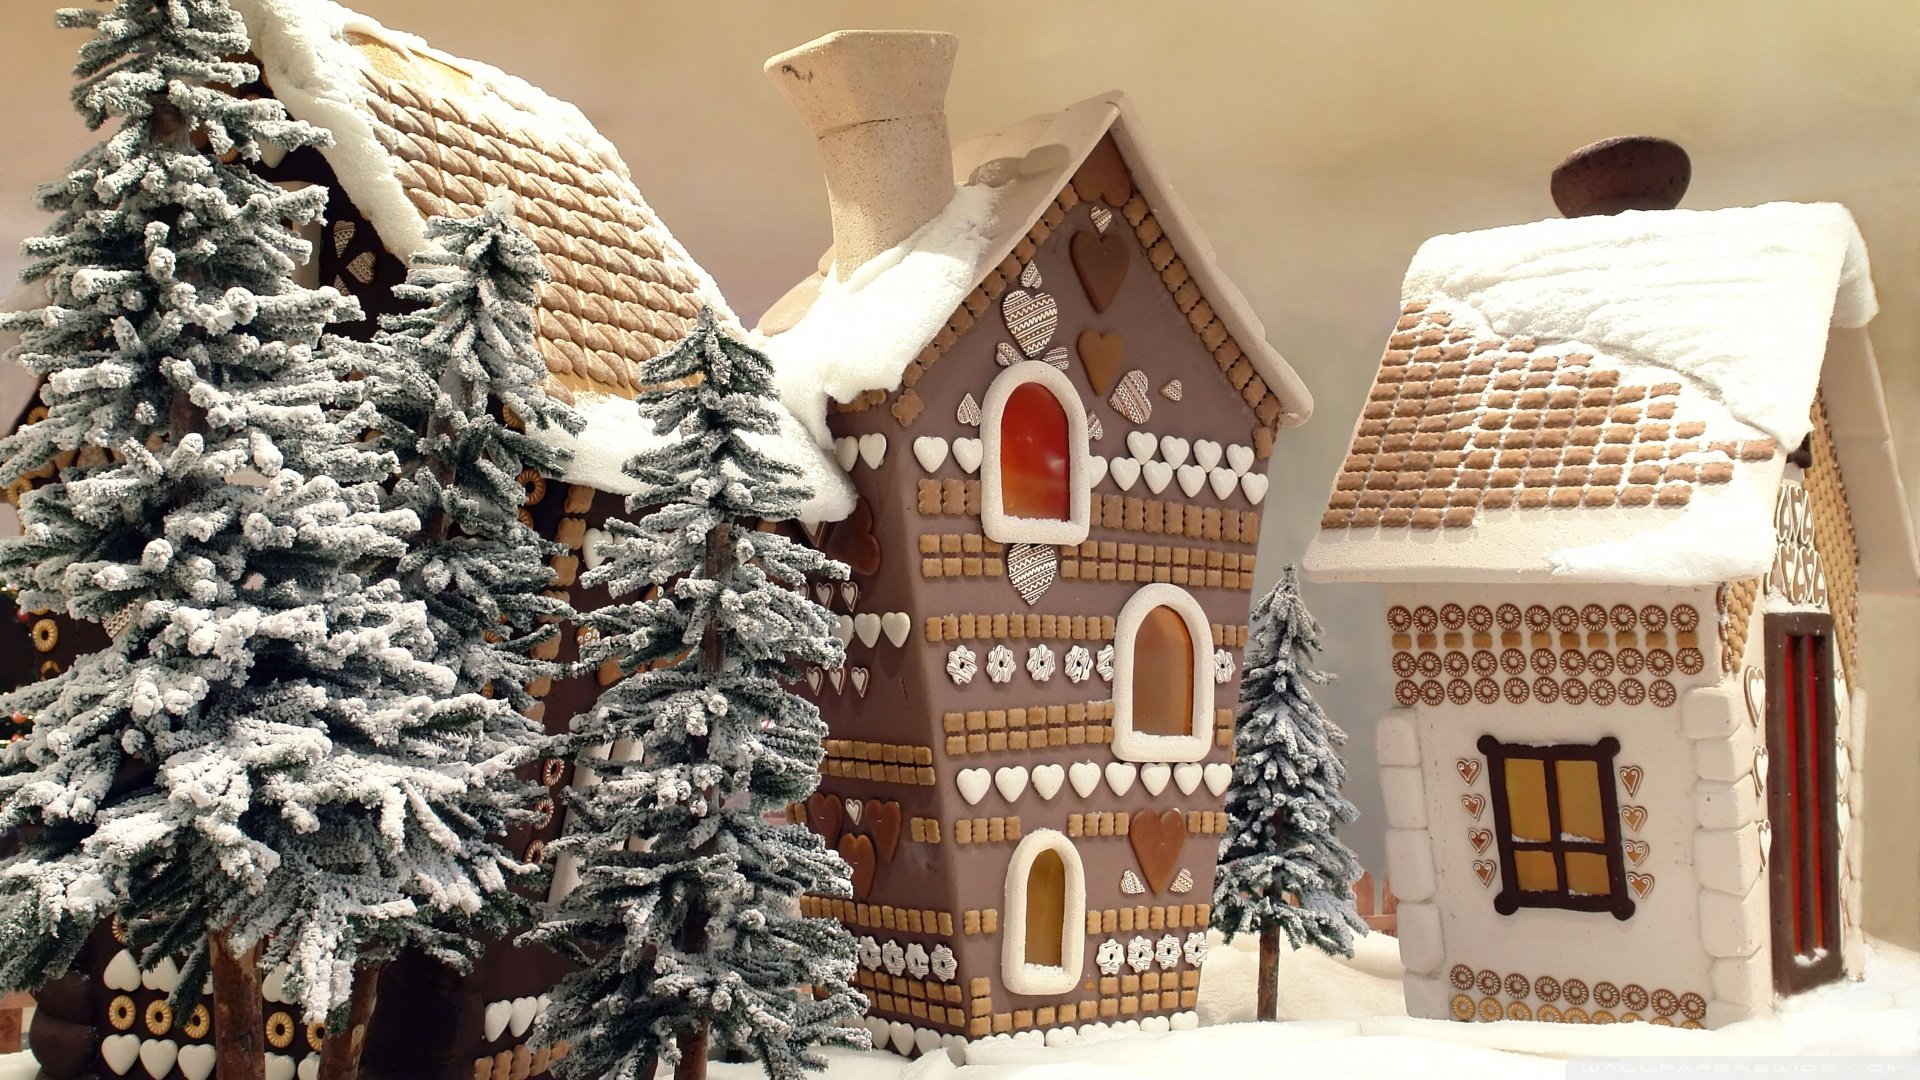 Gingerbread Houses Wallpaper 1920x1080 Gingerbread Houses